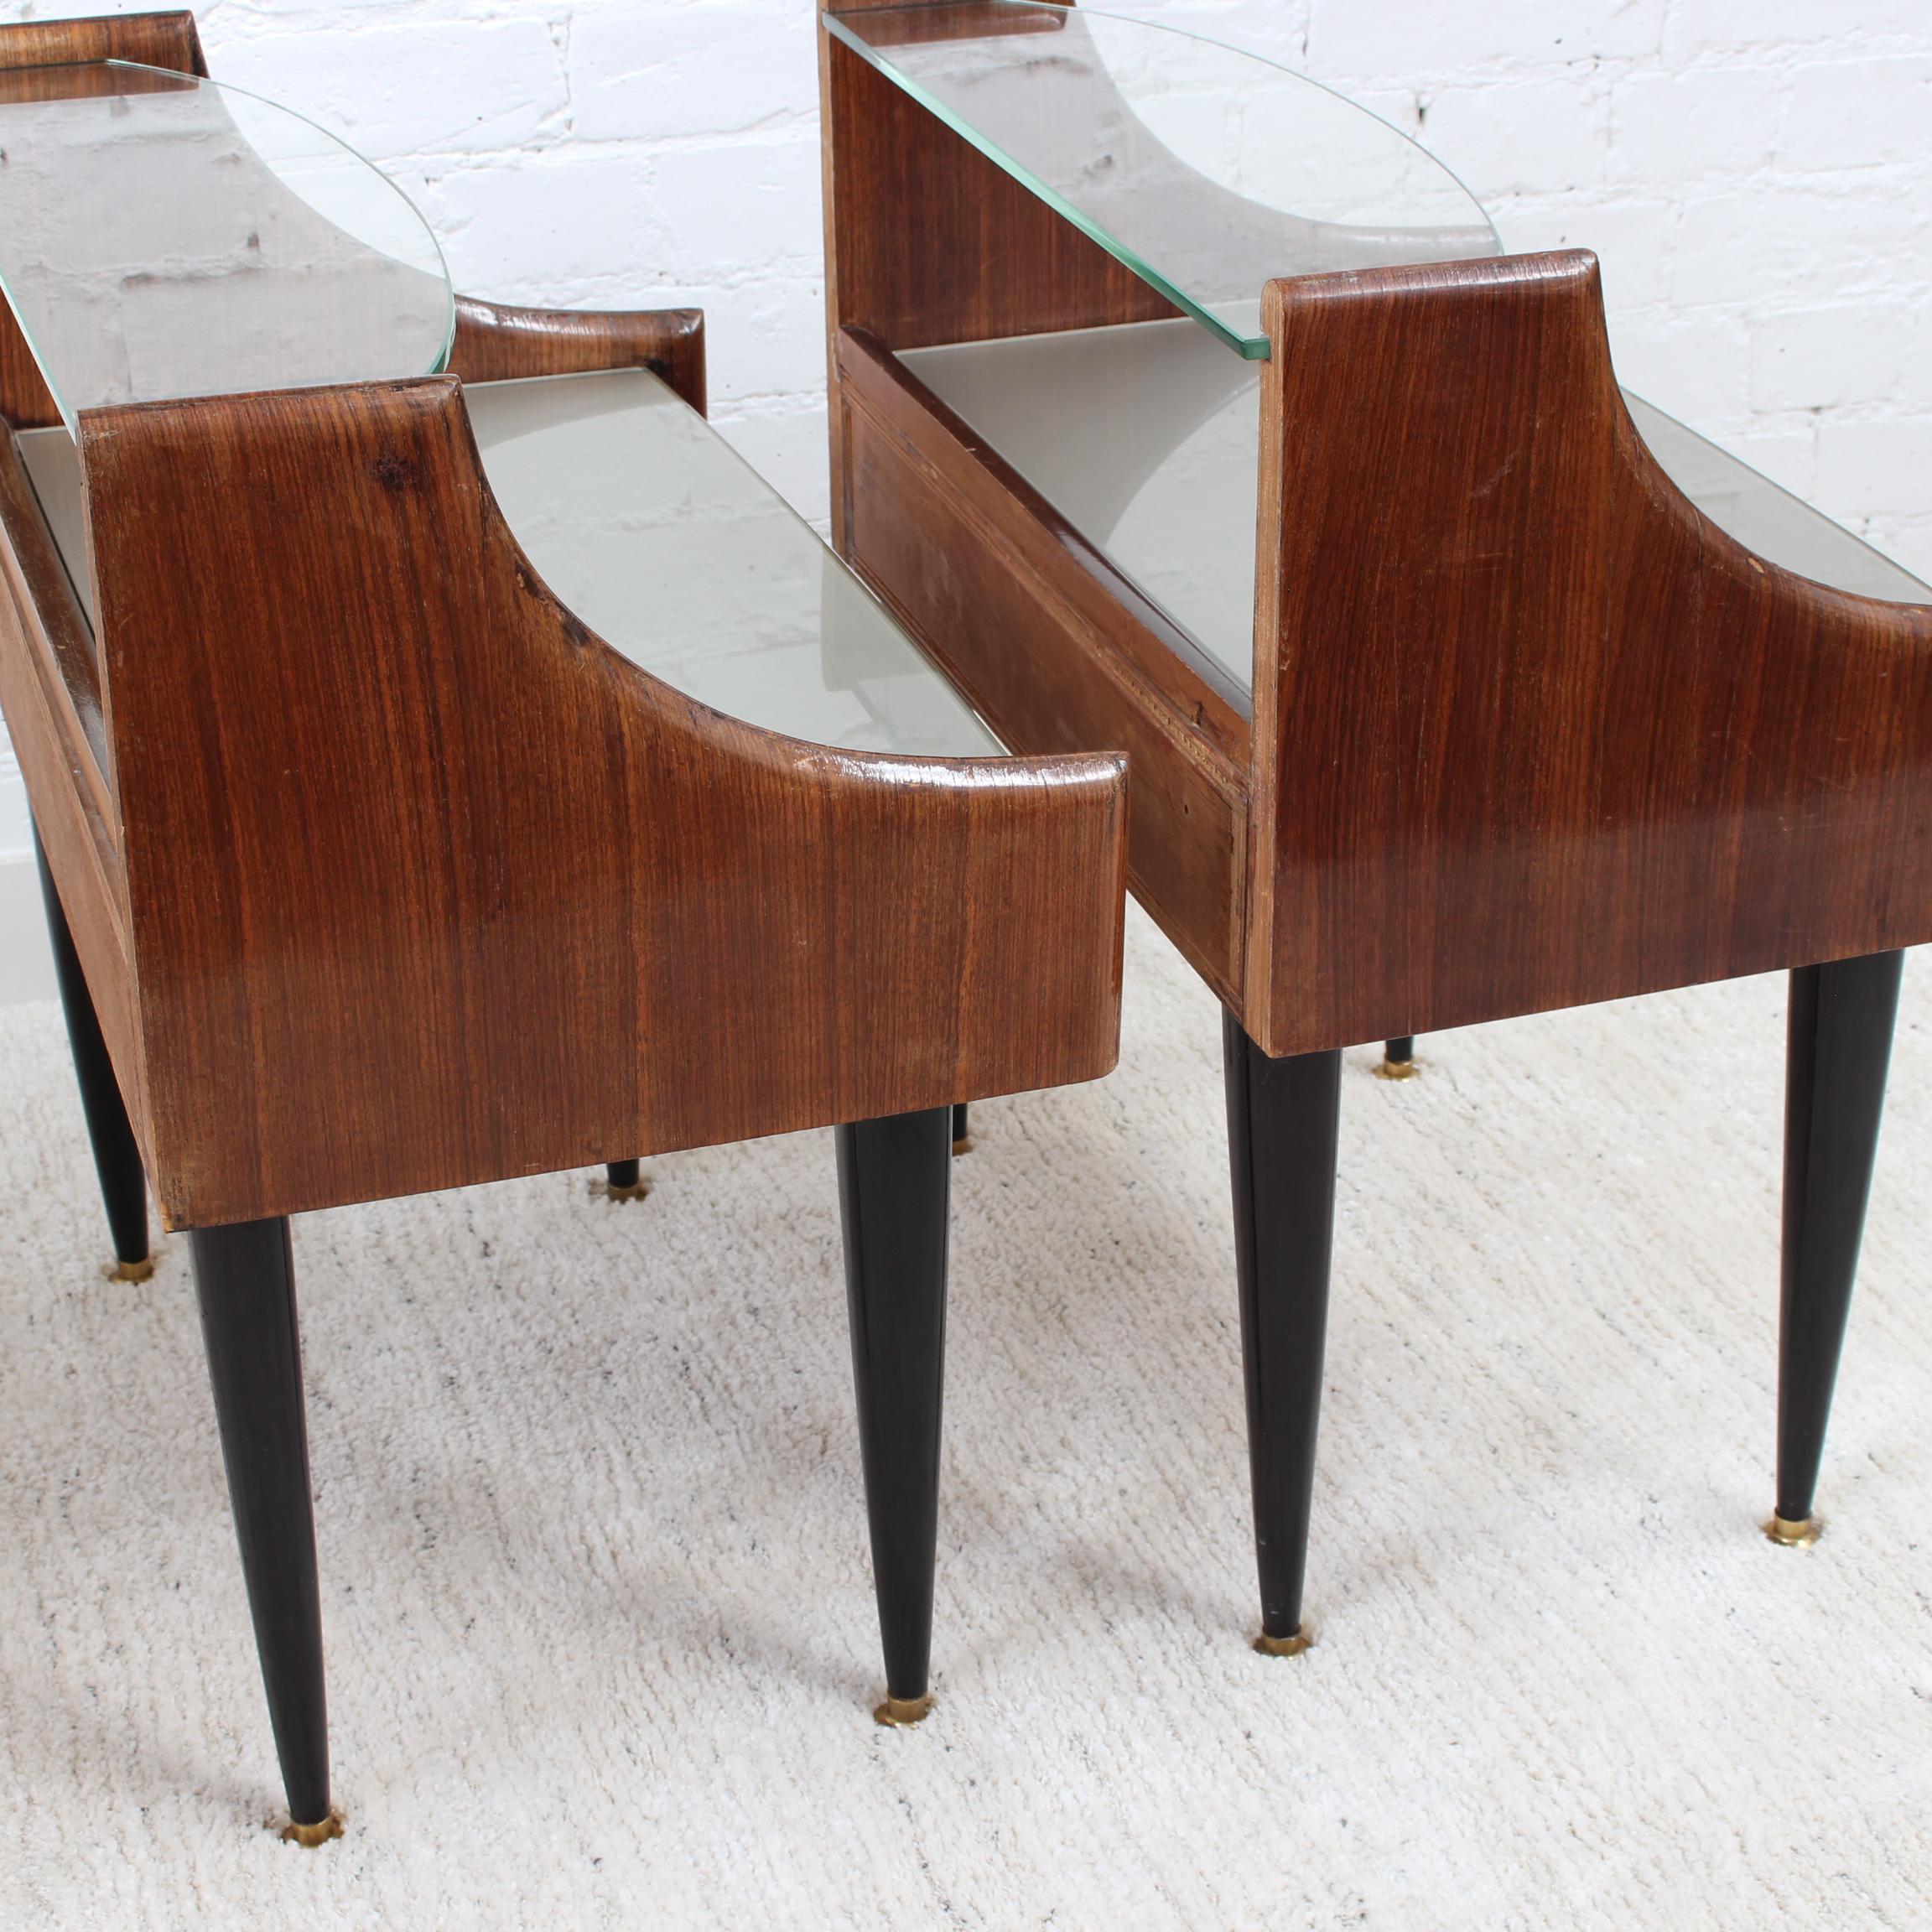 Pair of Vintage Italian Bedside Tables / Night Stands (circa 1950s) 1